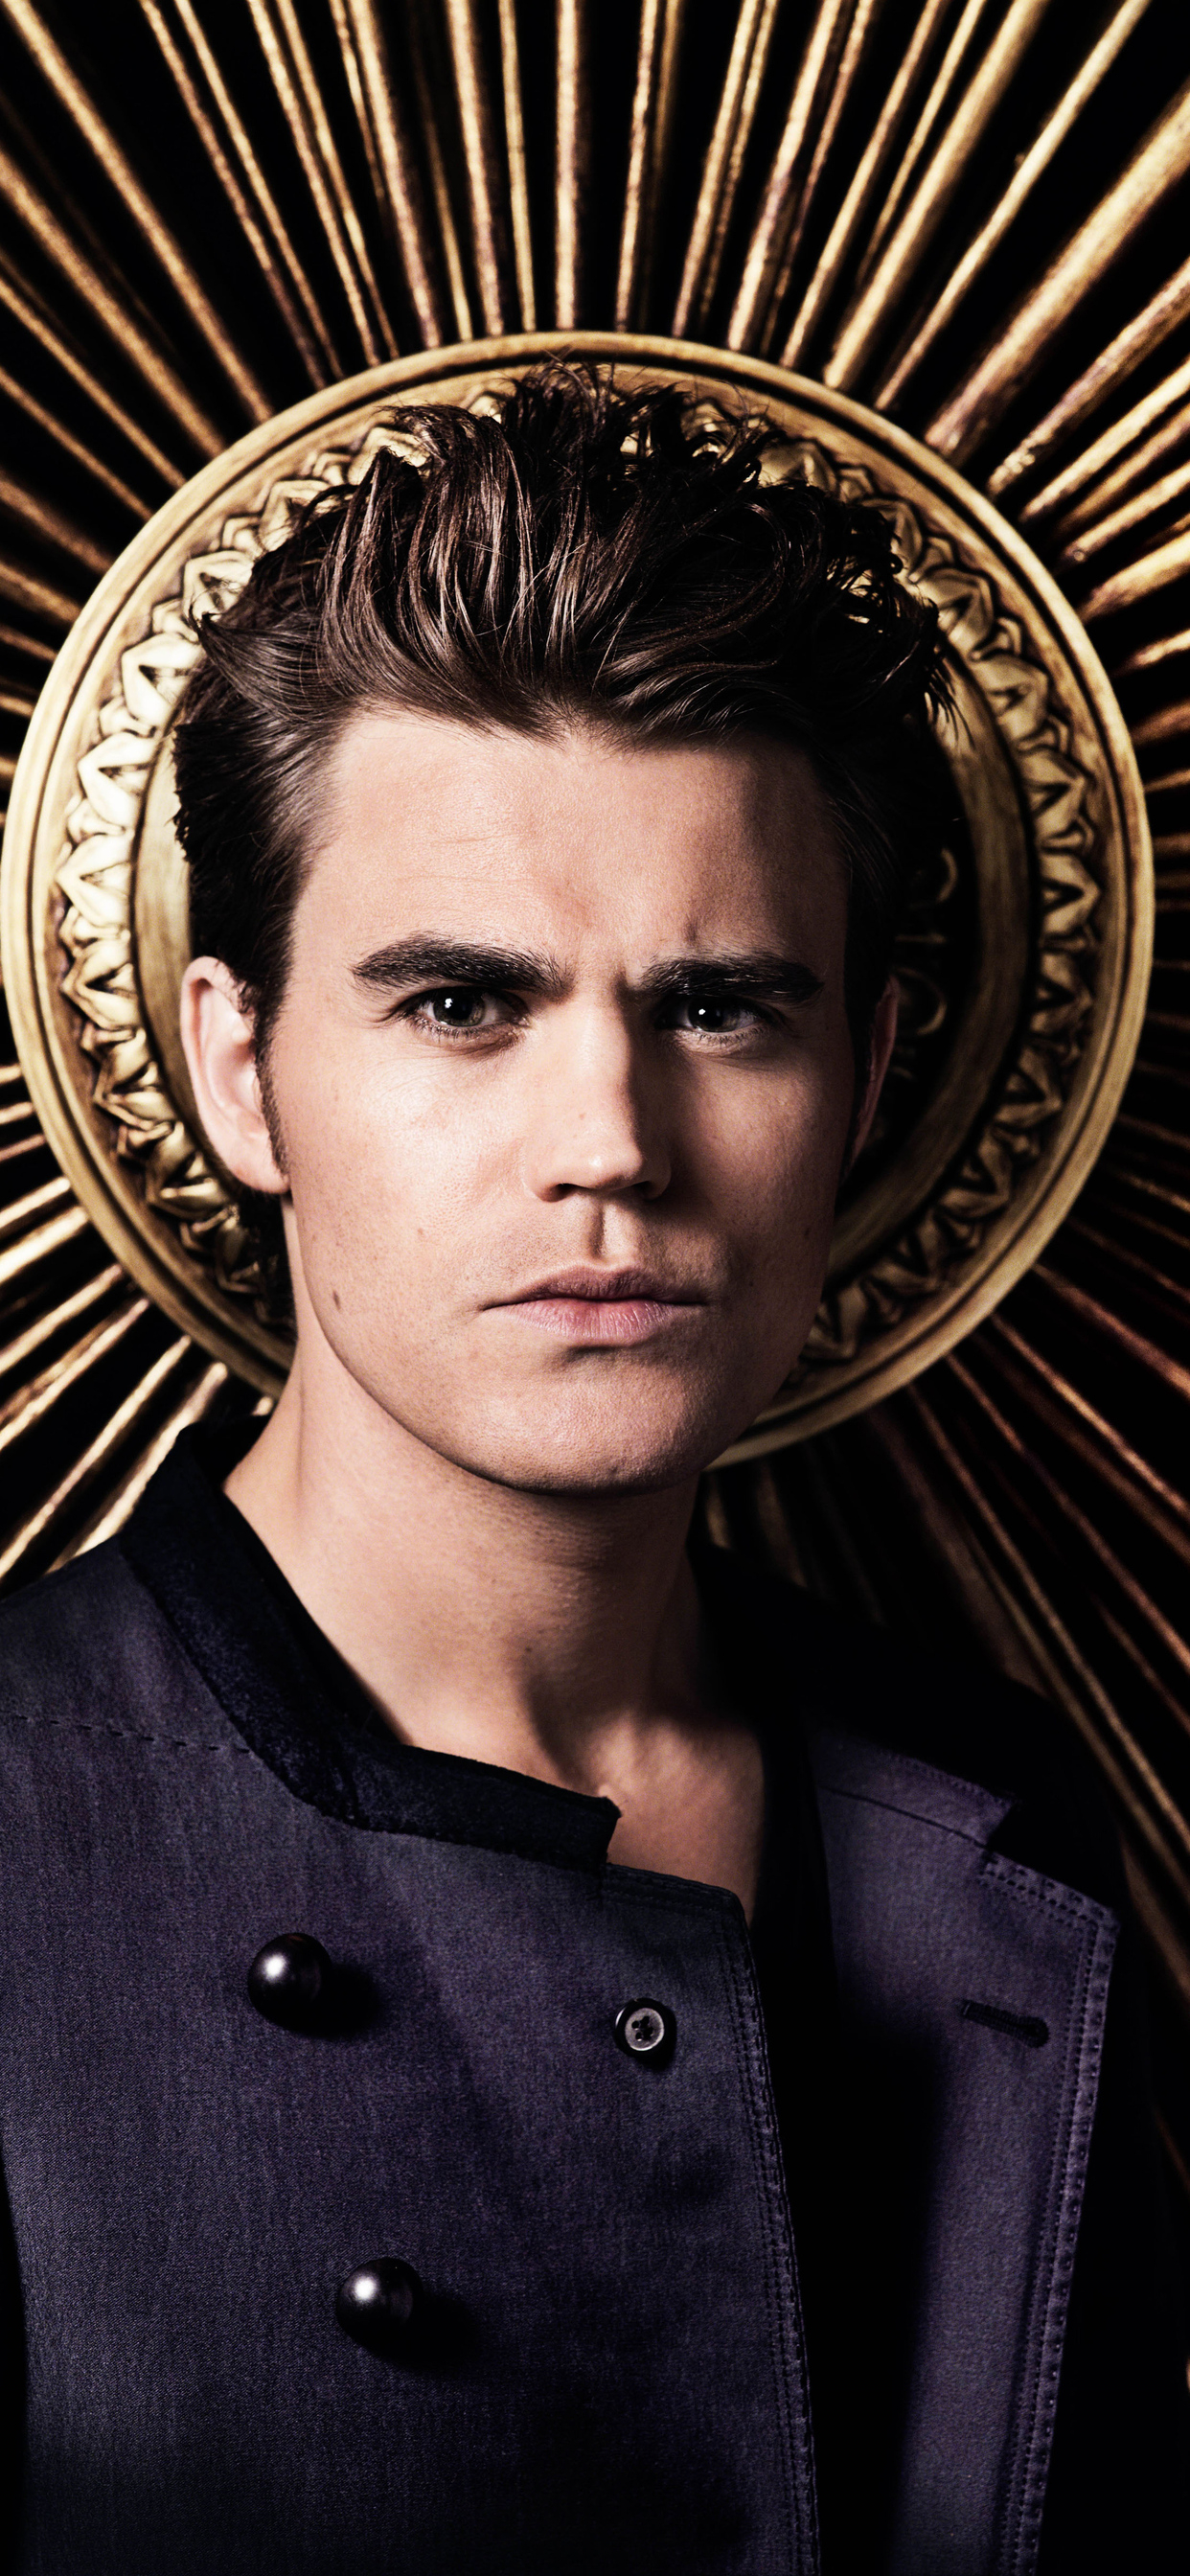 1242x2688 Paul Wesley As Stefan Salvatore The Vampire Diaries 4k Iphone XS MAX HD 4k Wallpapers, Images, Backgrounds, Photos and Pictures